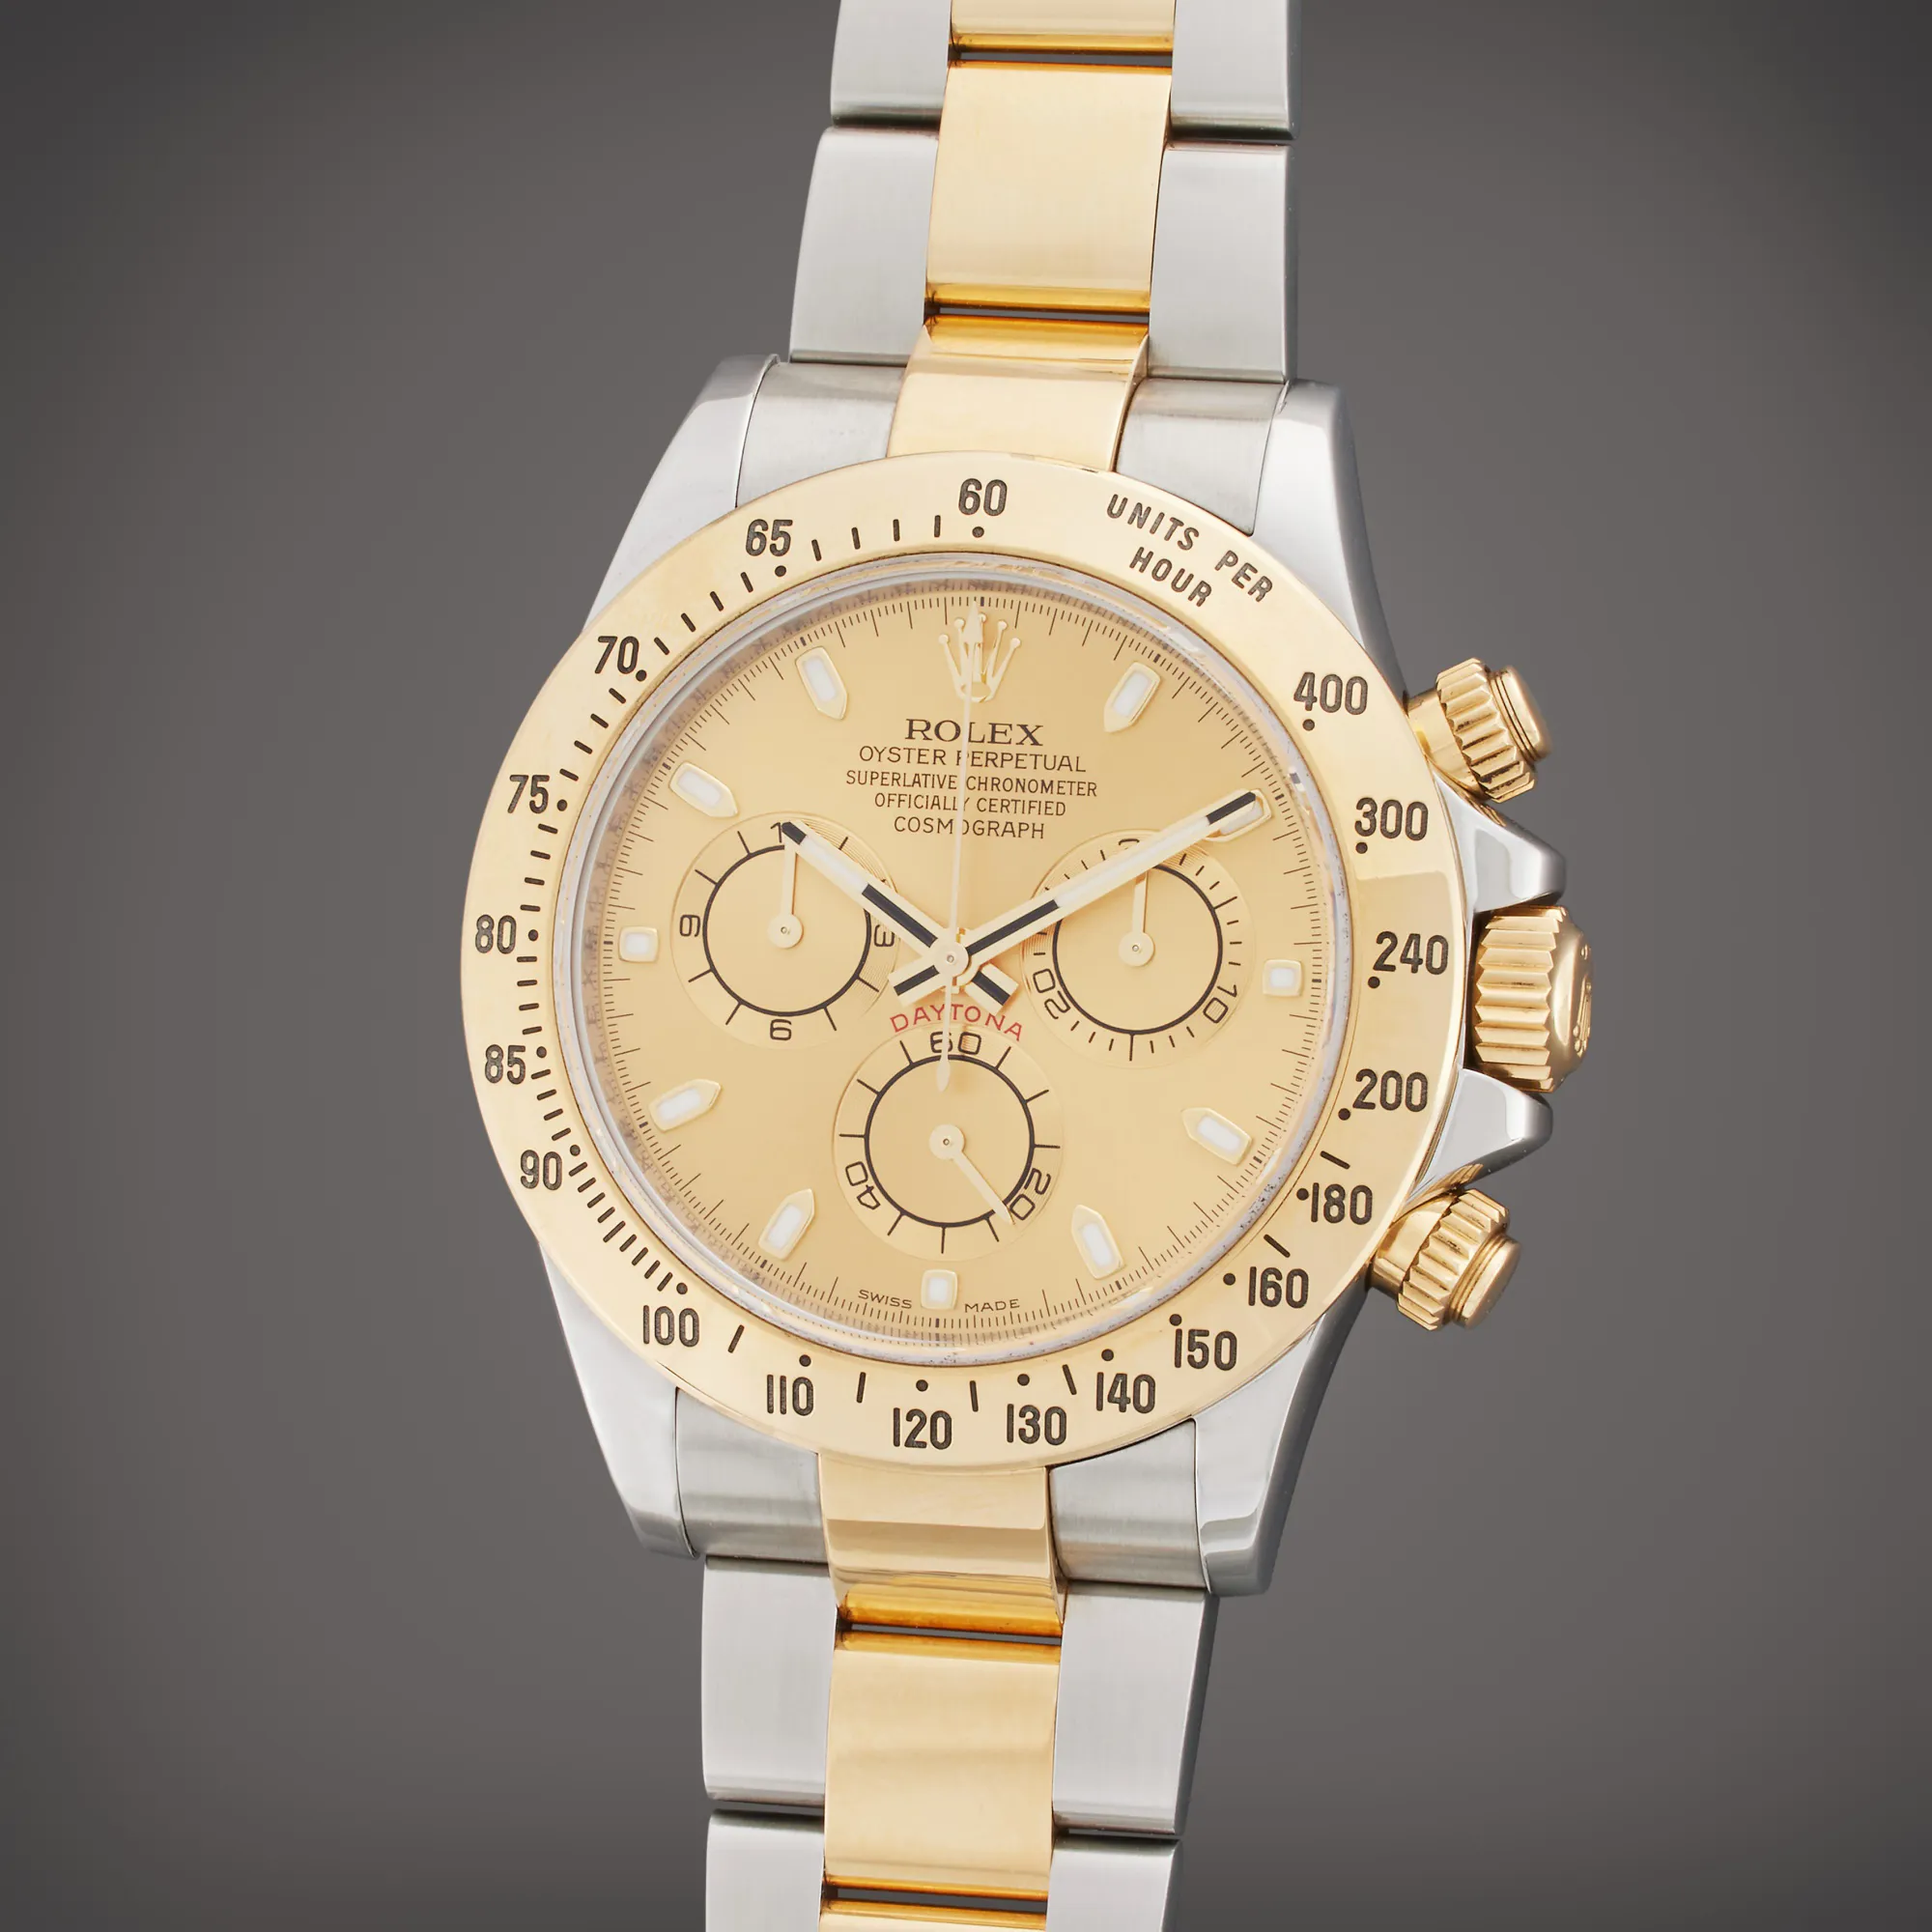 Rolex Daytona 116523 40mm Yellow gold and stainless steel Champagne